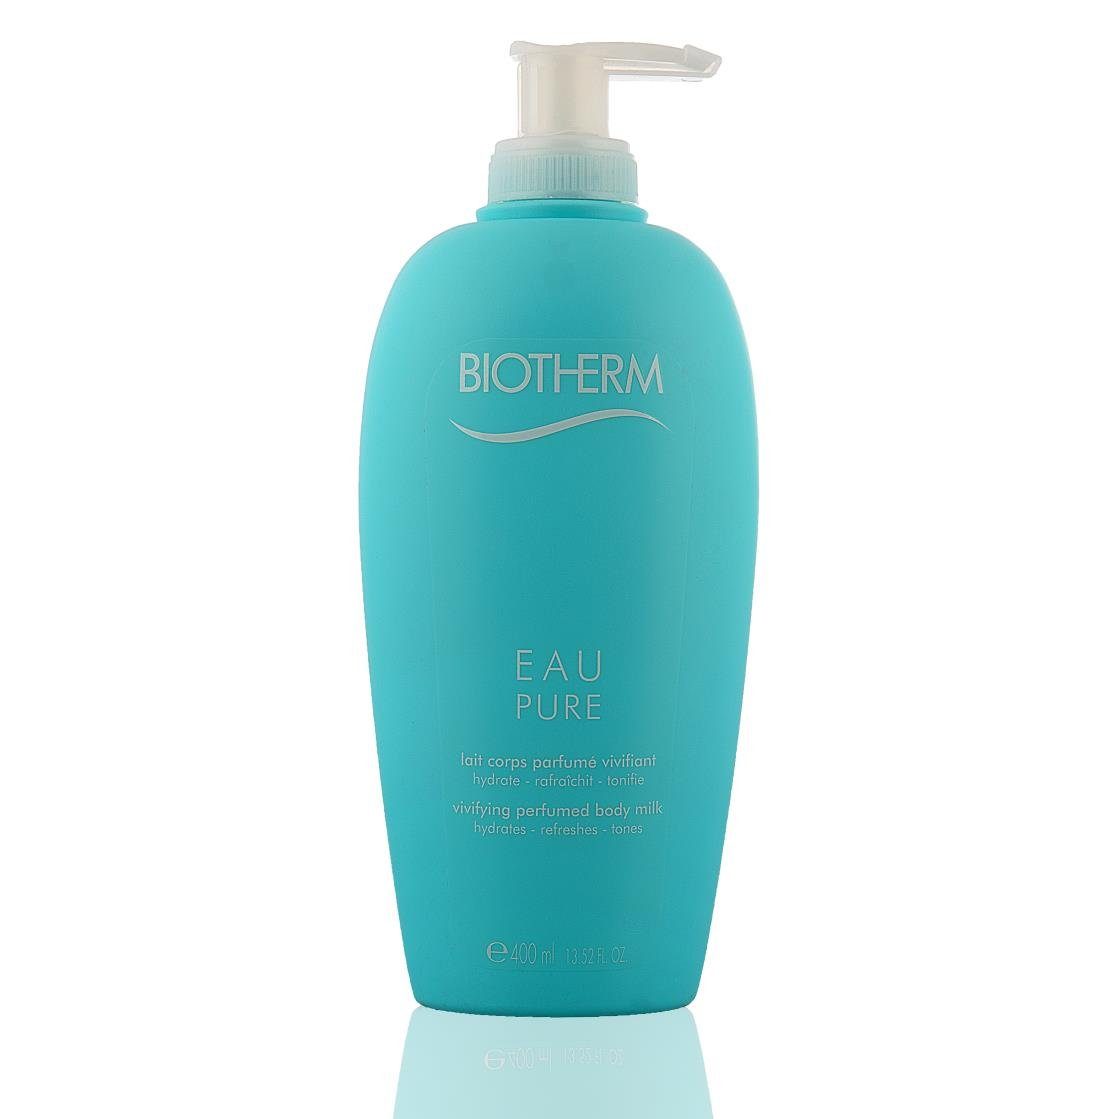 BIOTHERM Bodylotion Biotherm Eau Pure Bodylotion 400 ml Packung